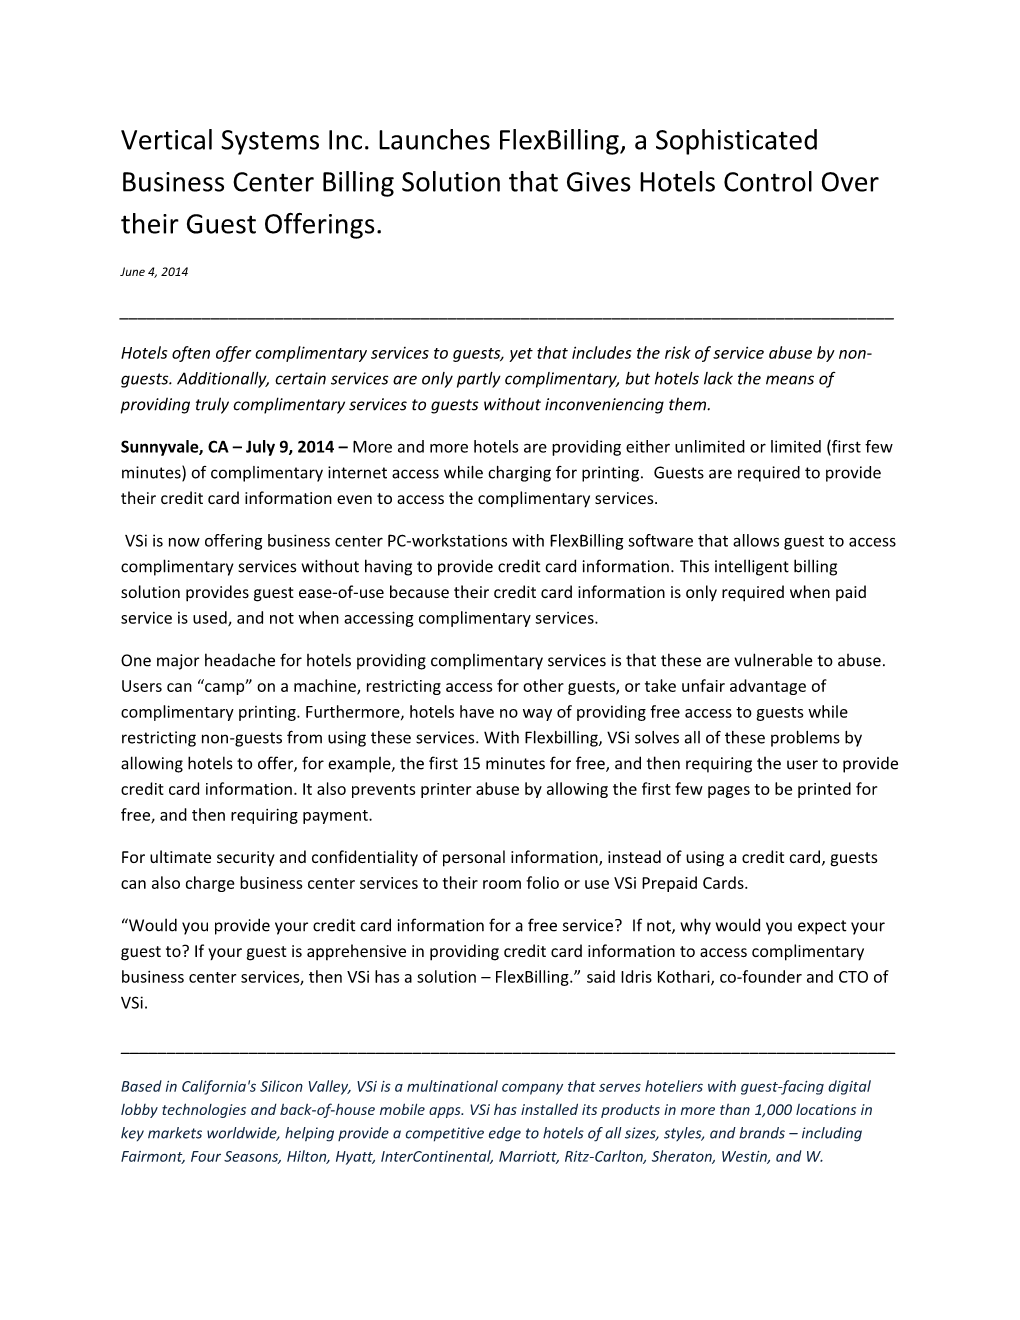 Vertical Systems Inc. Launches Flexbilling, a Sophisticated Business Center Billing Solution